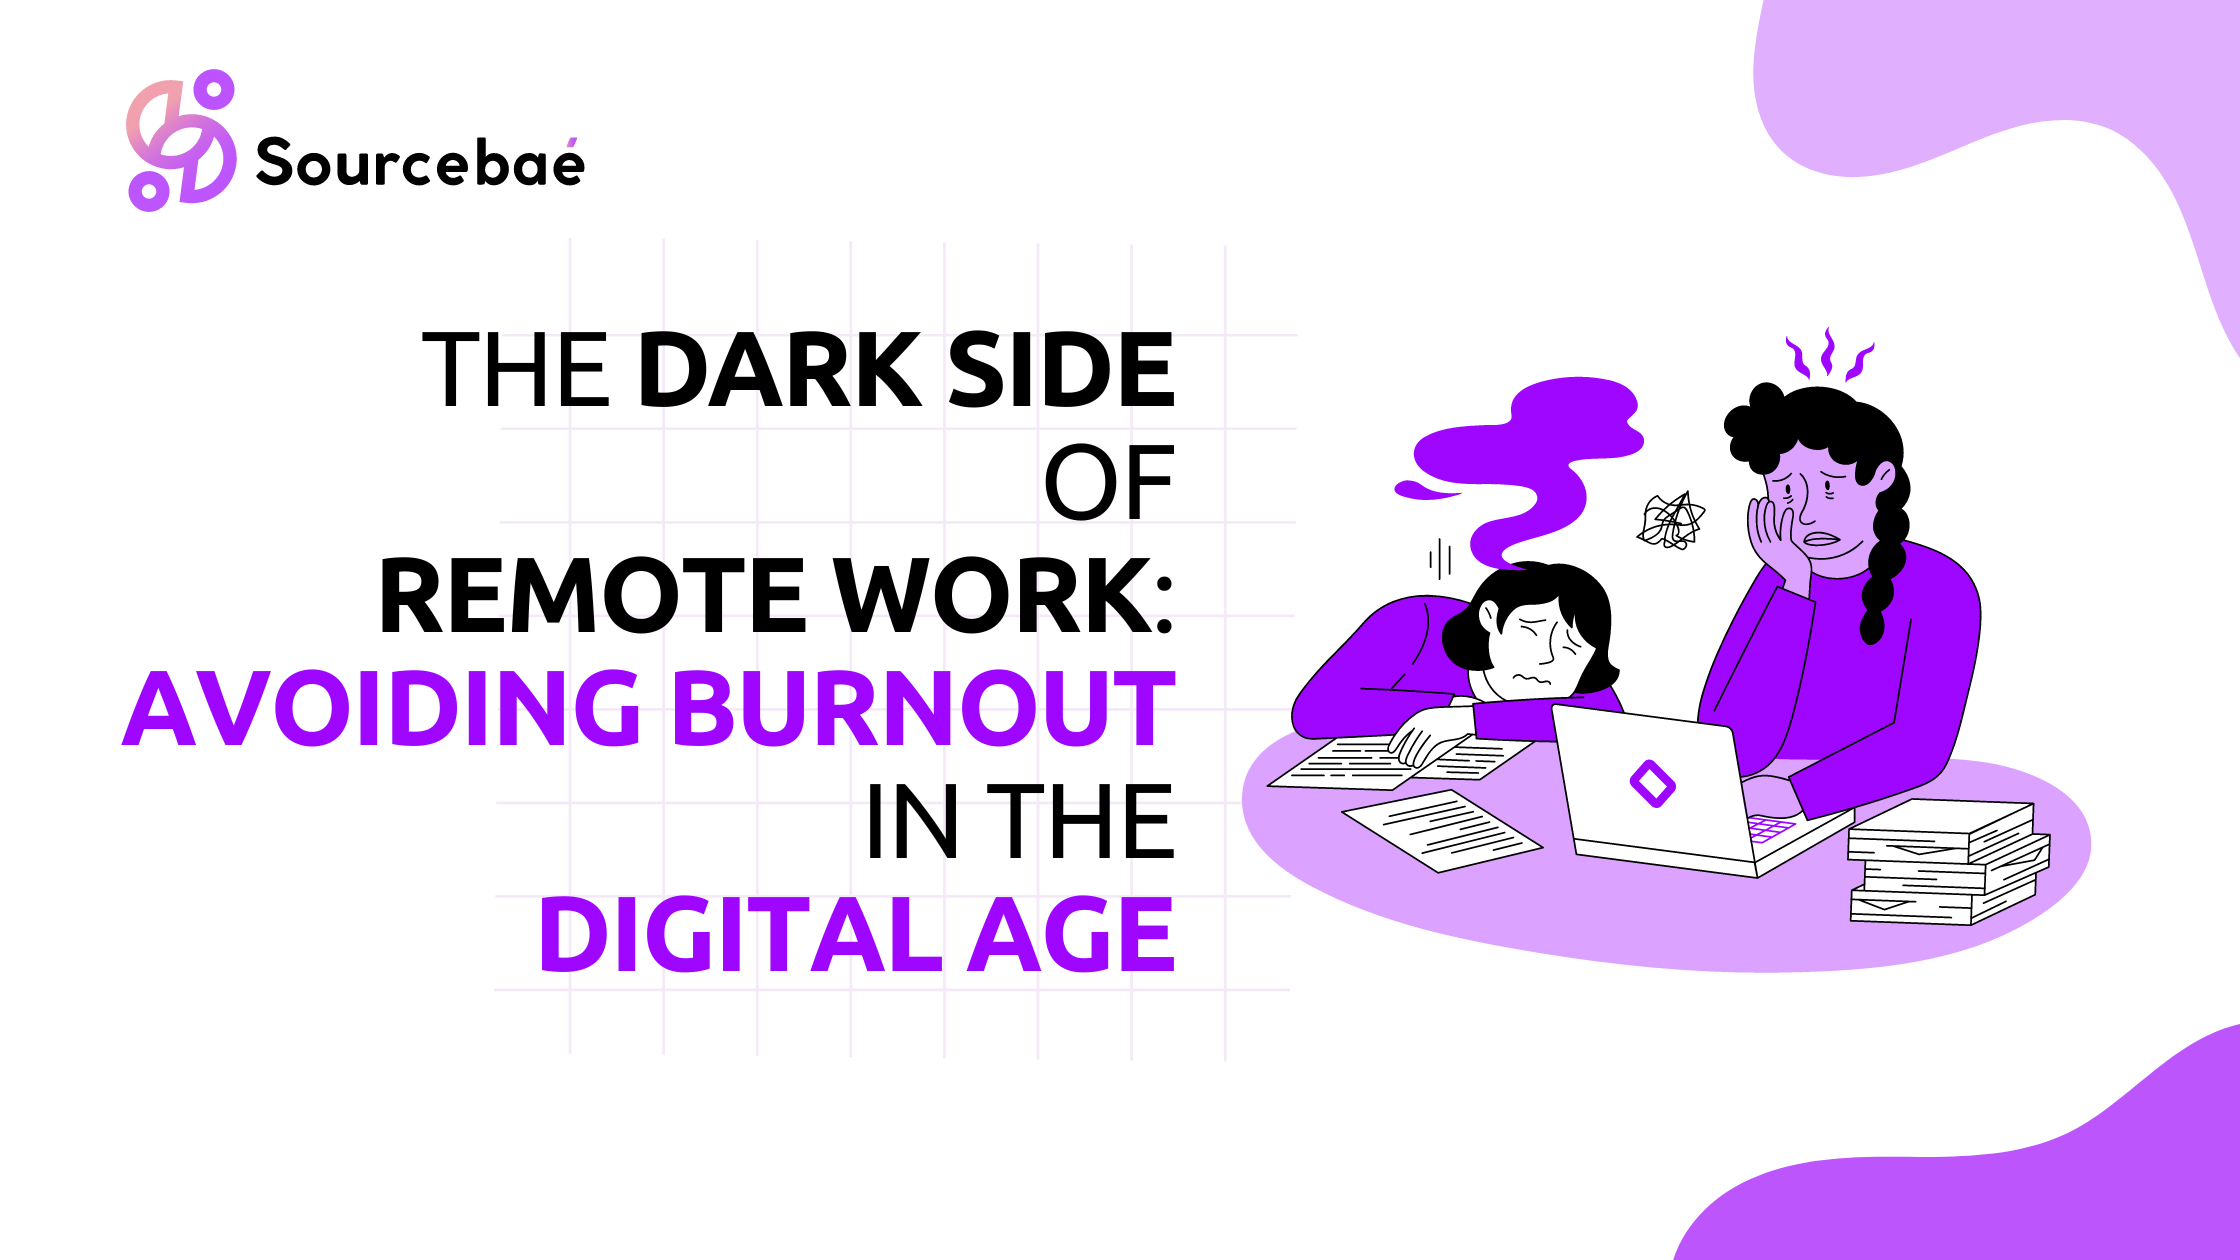 The Dark Side of Remote Work: Avoiding Burnout in the Digital Age